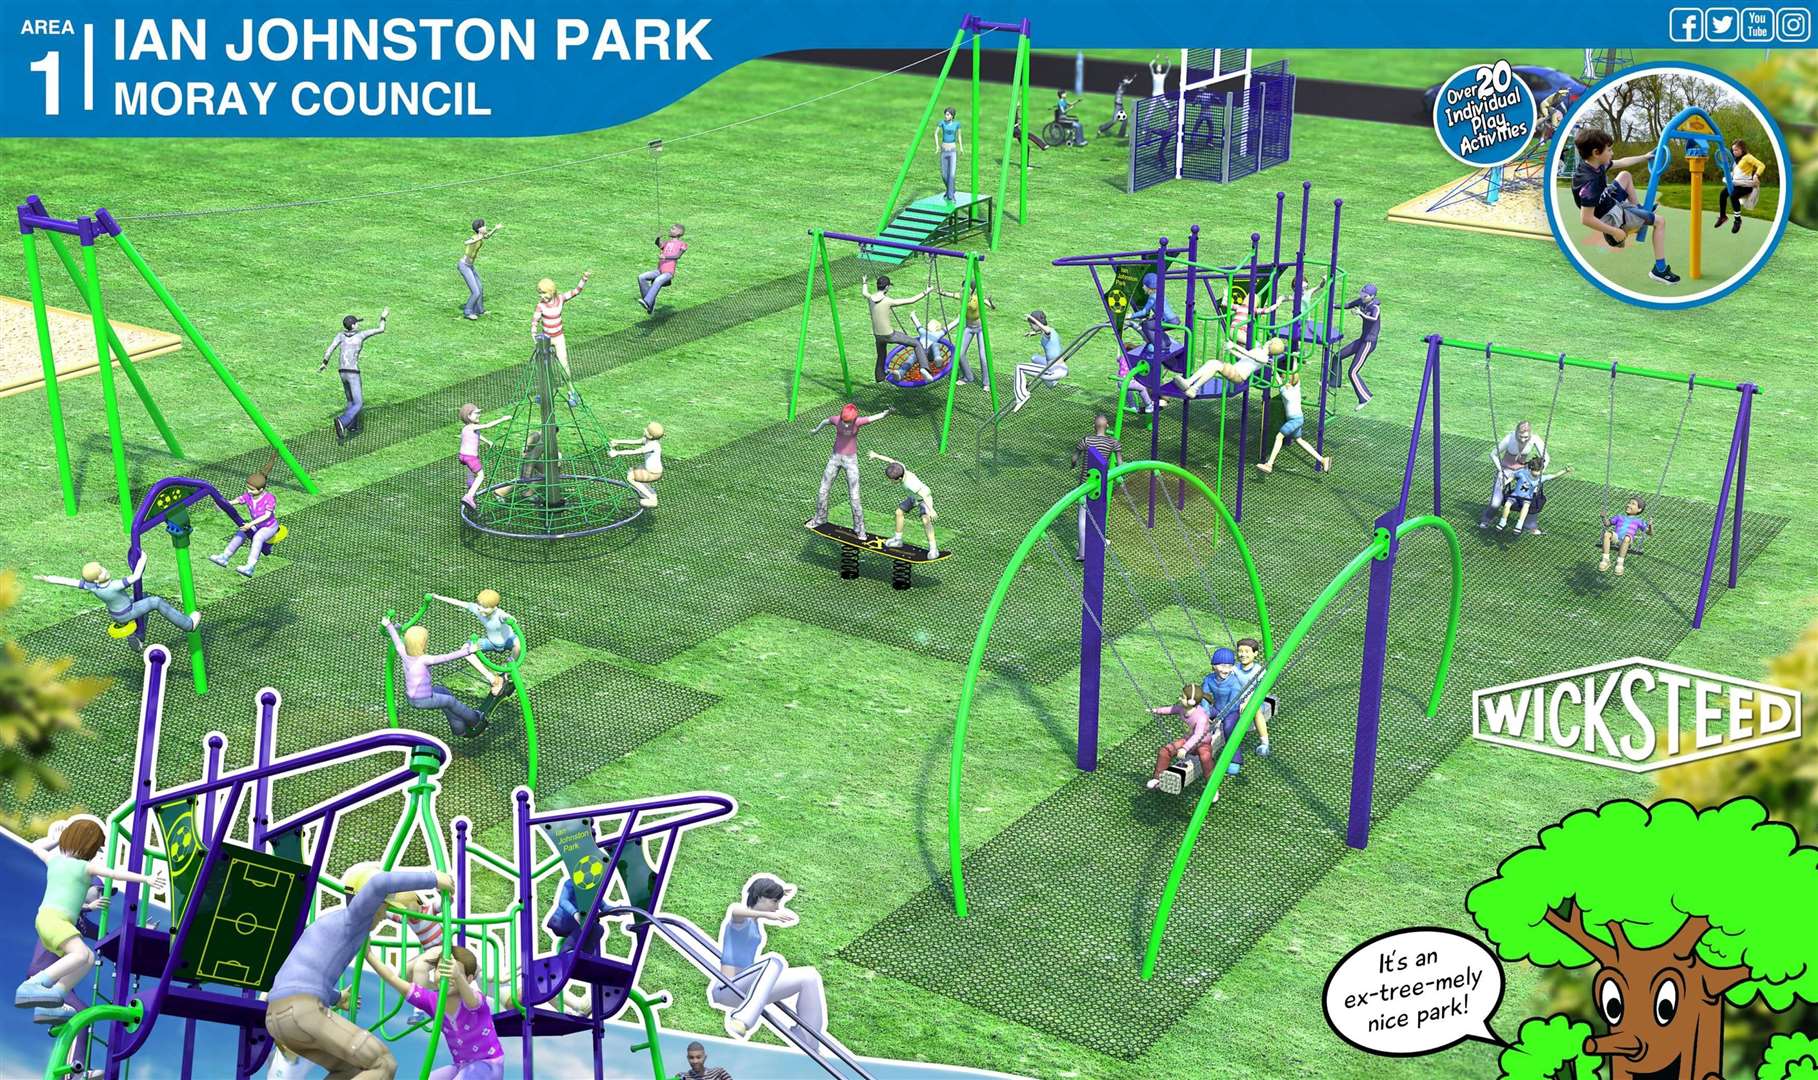 An artist's impression of how the revamped play park will look.